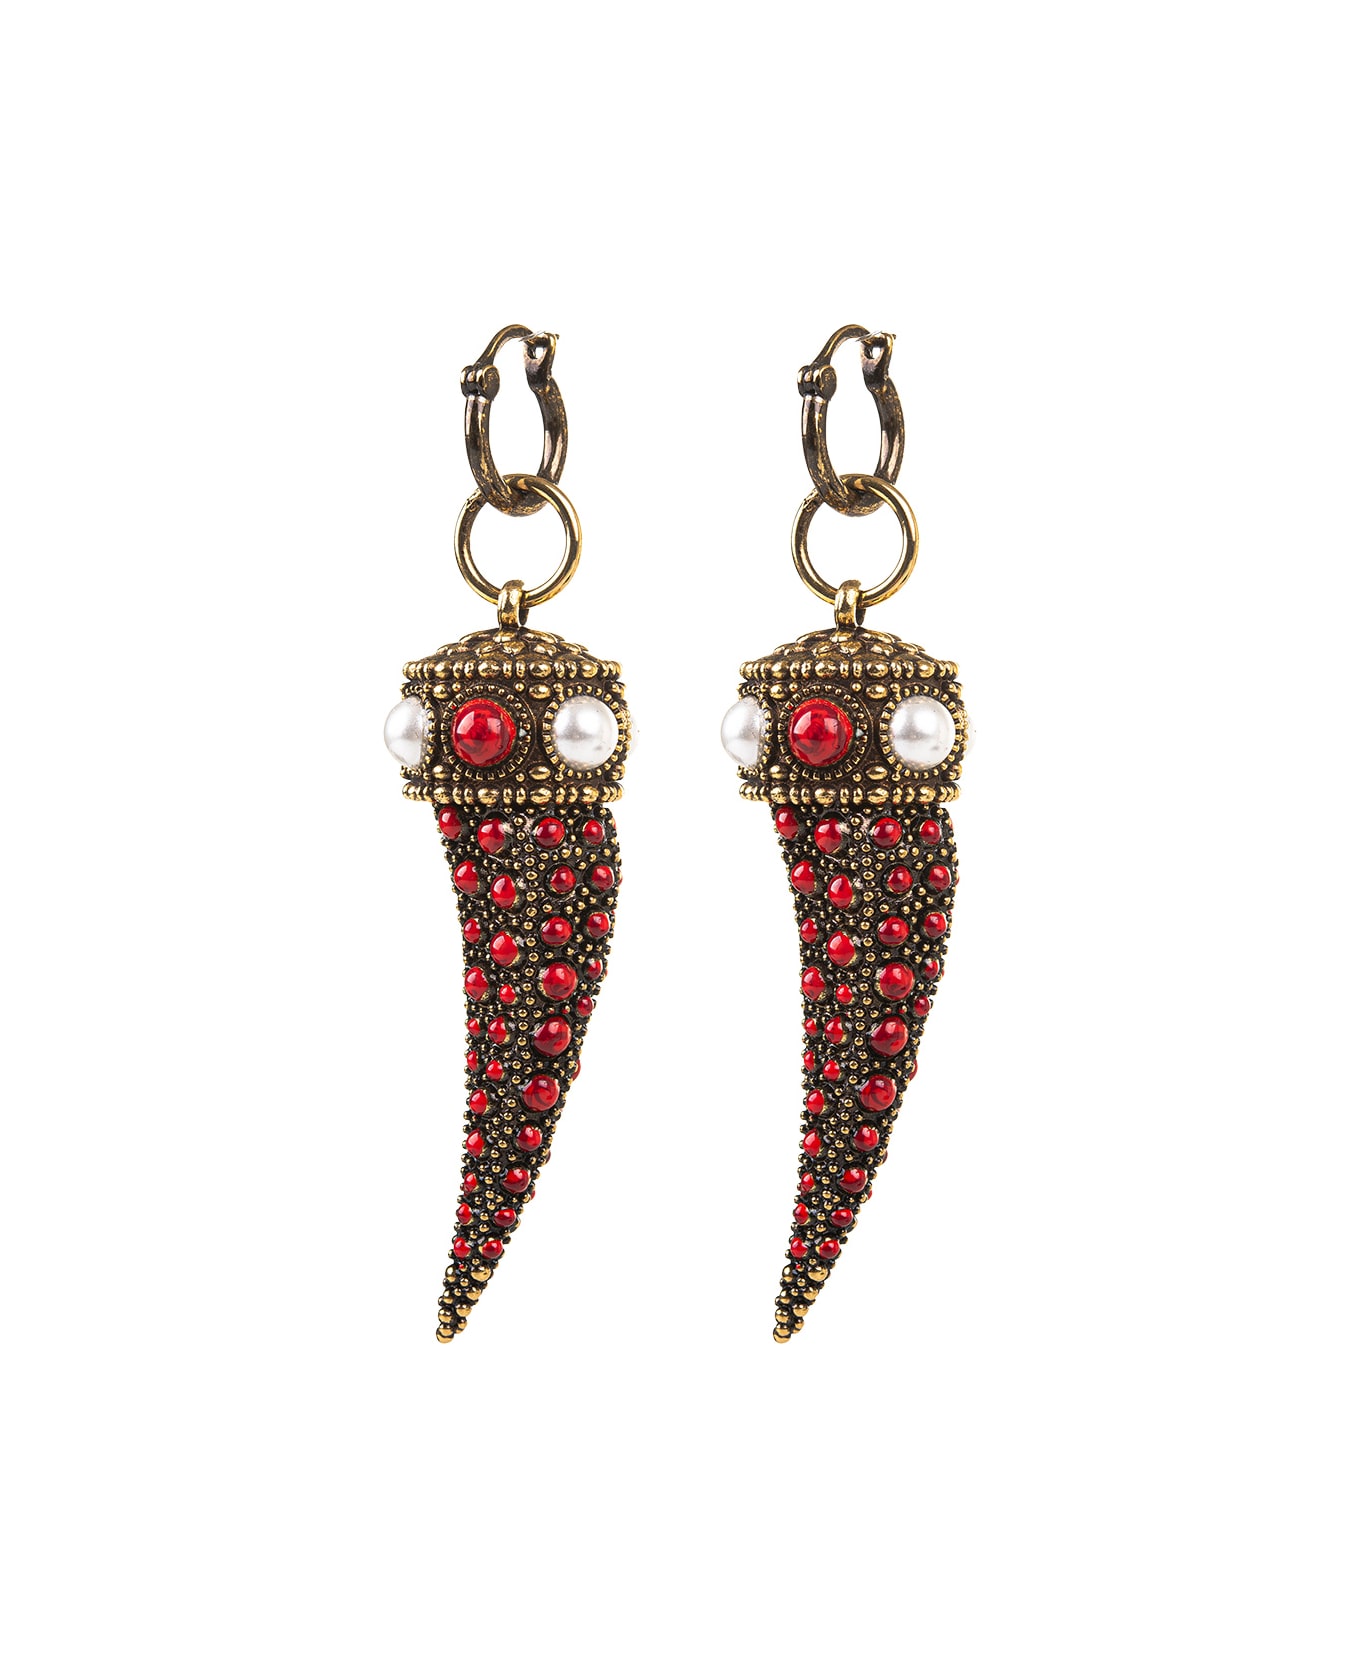 Roberto Cavalli Pendant Earrings With Coral Stones - Gold